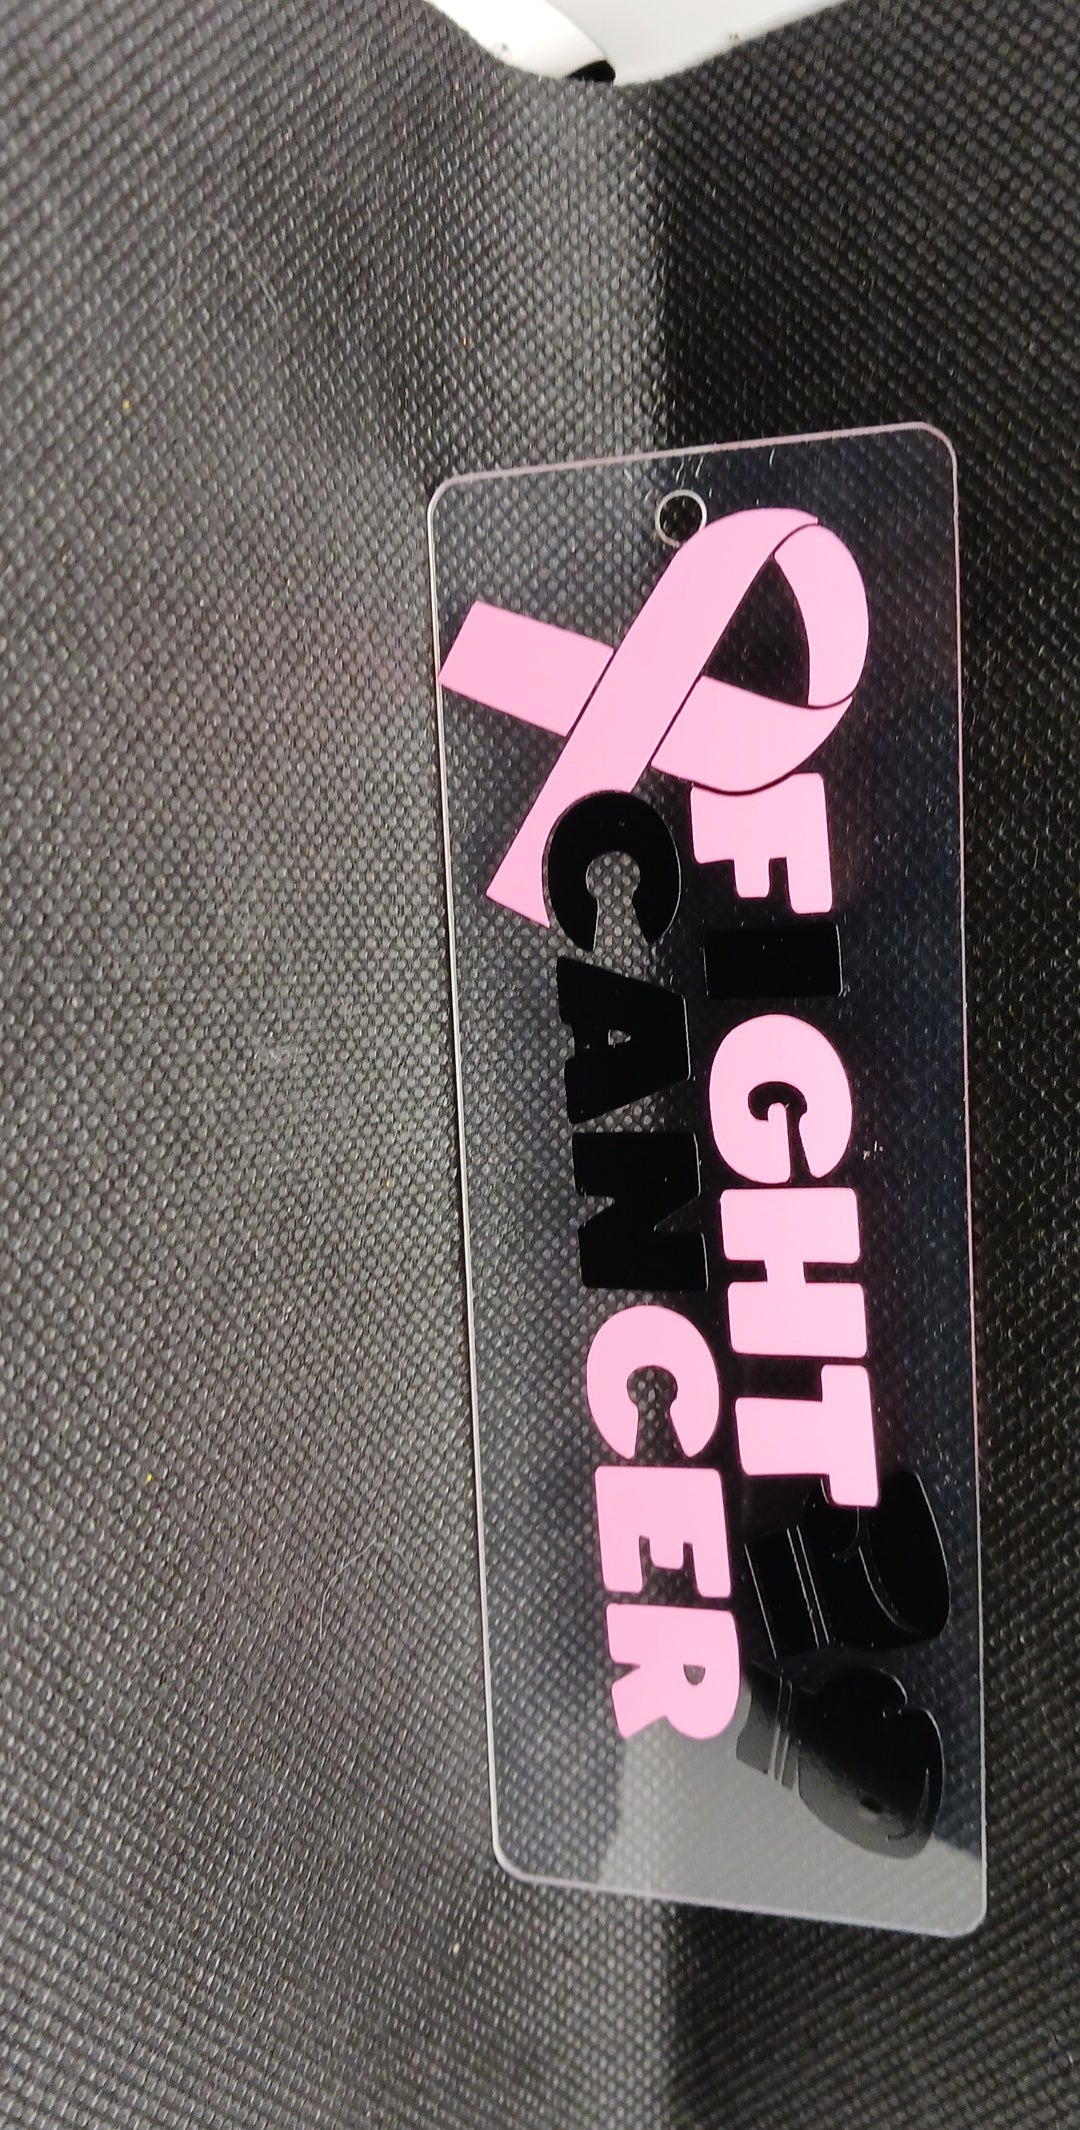 Breast Cancer Awareness Acrylic Bookmarks